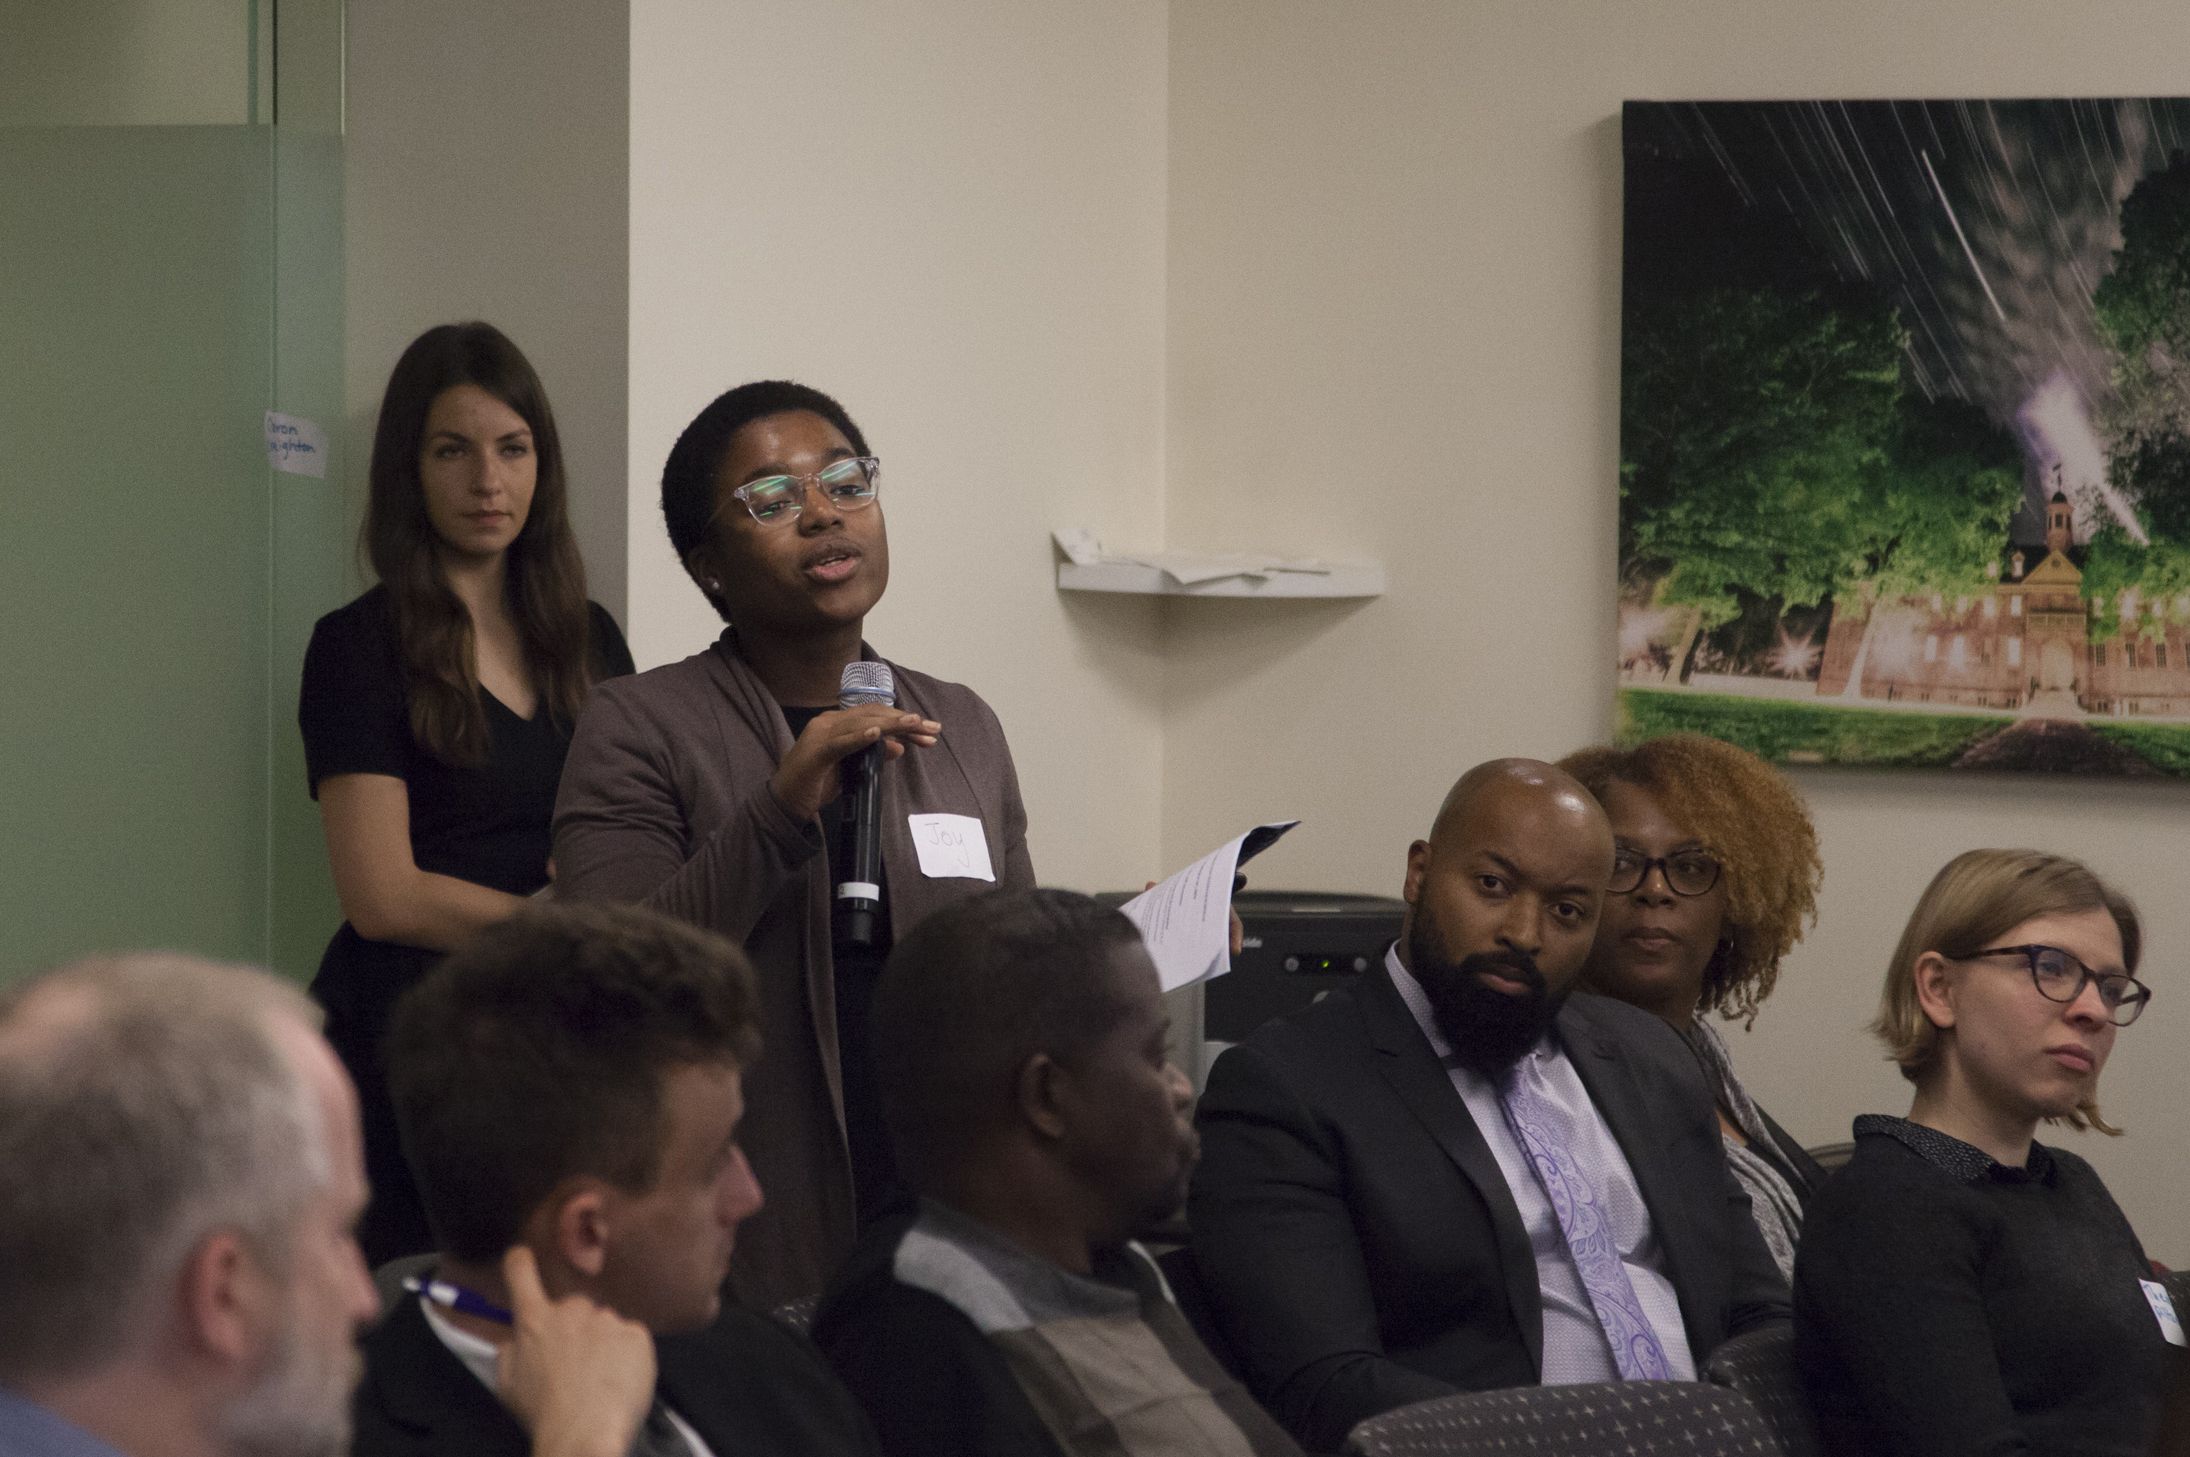 Joy Ikekhua (Spelman College) poses a question to the global health panel. Image by Jin Ding. United States, 2018.